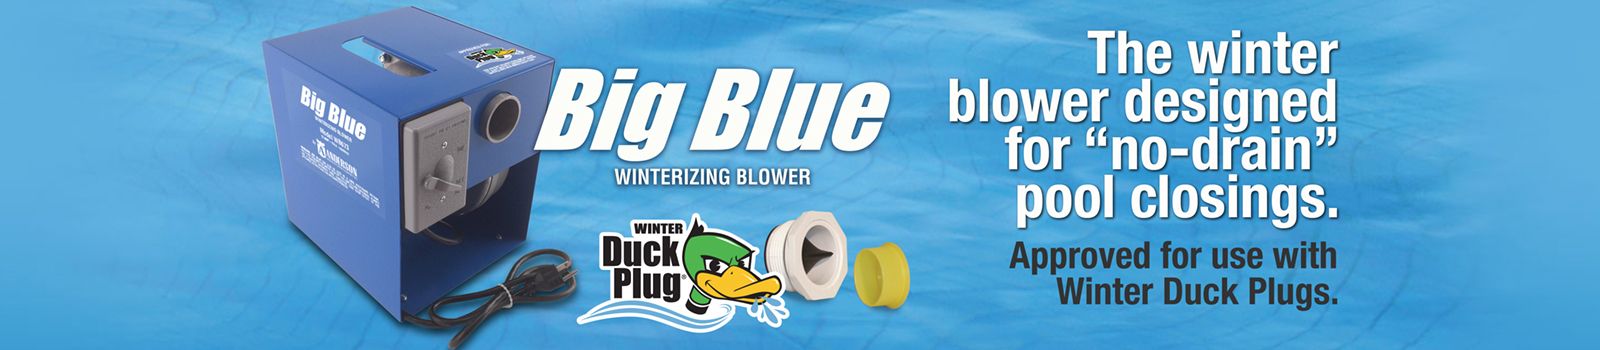 The winter blower designed for "no-drain" pool closings